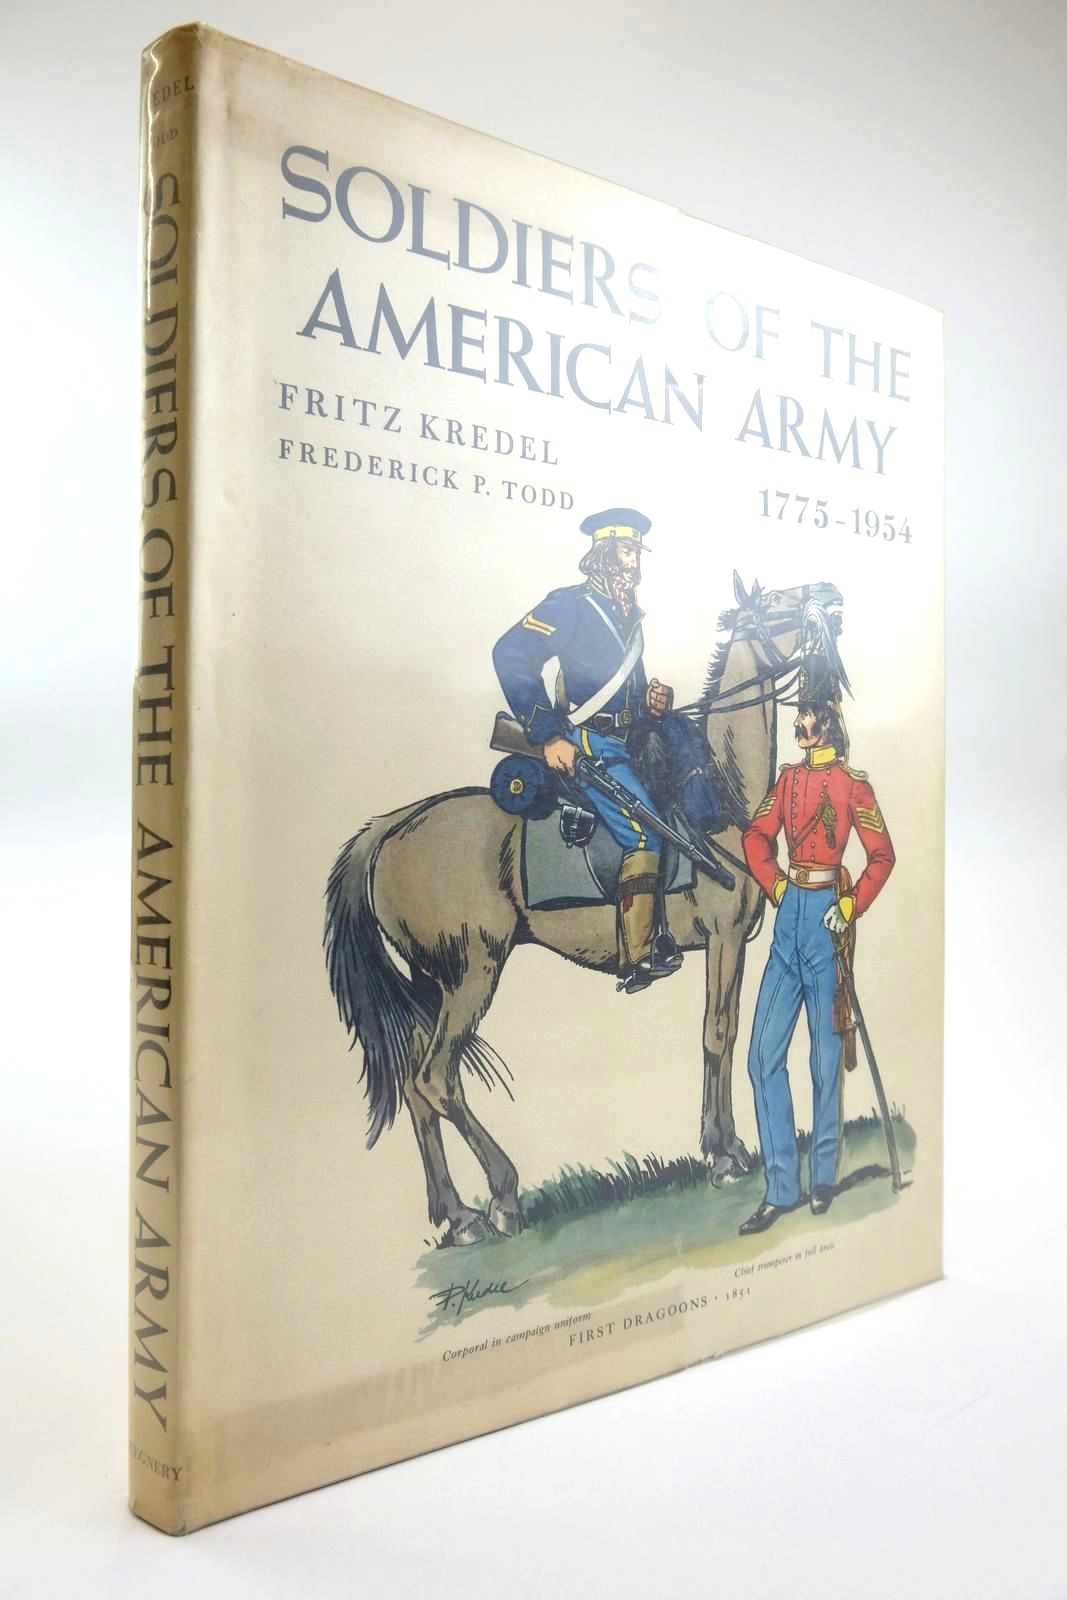 Photo of SOLDIERS OF THE AMERICAN ARMY 1775 - 1954 written by Todd, Frederick P. Kredel, Fritz illustrated by Kredel, Fritz published by Henry Regnery Company (STOCK CODE: 2133478)  for sale by Stella & Rose's Books